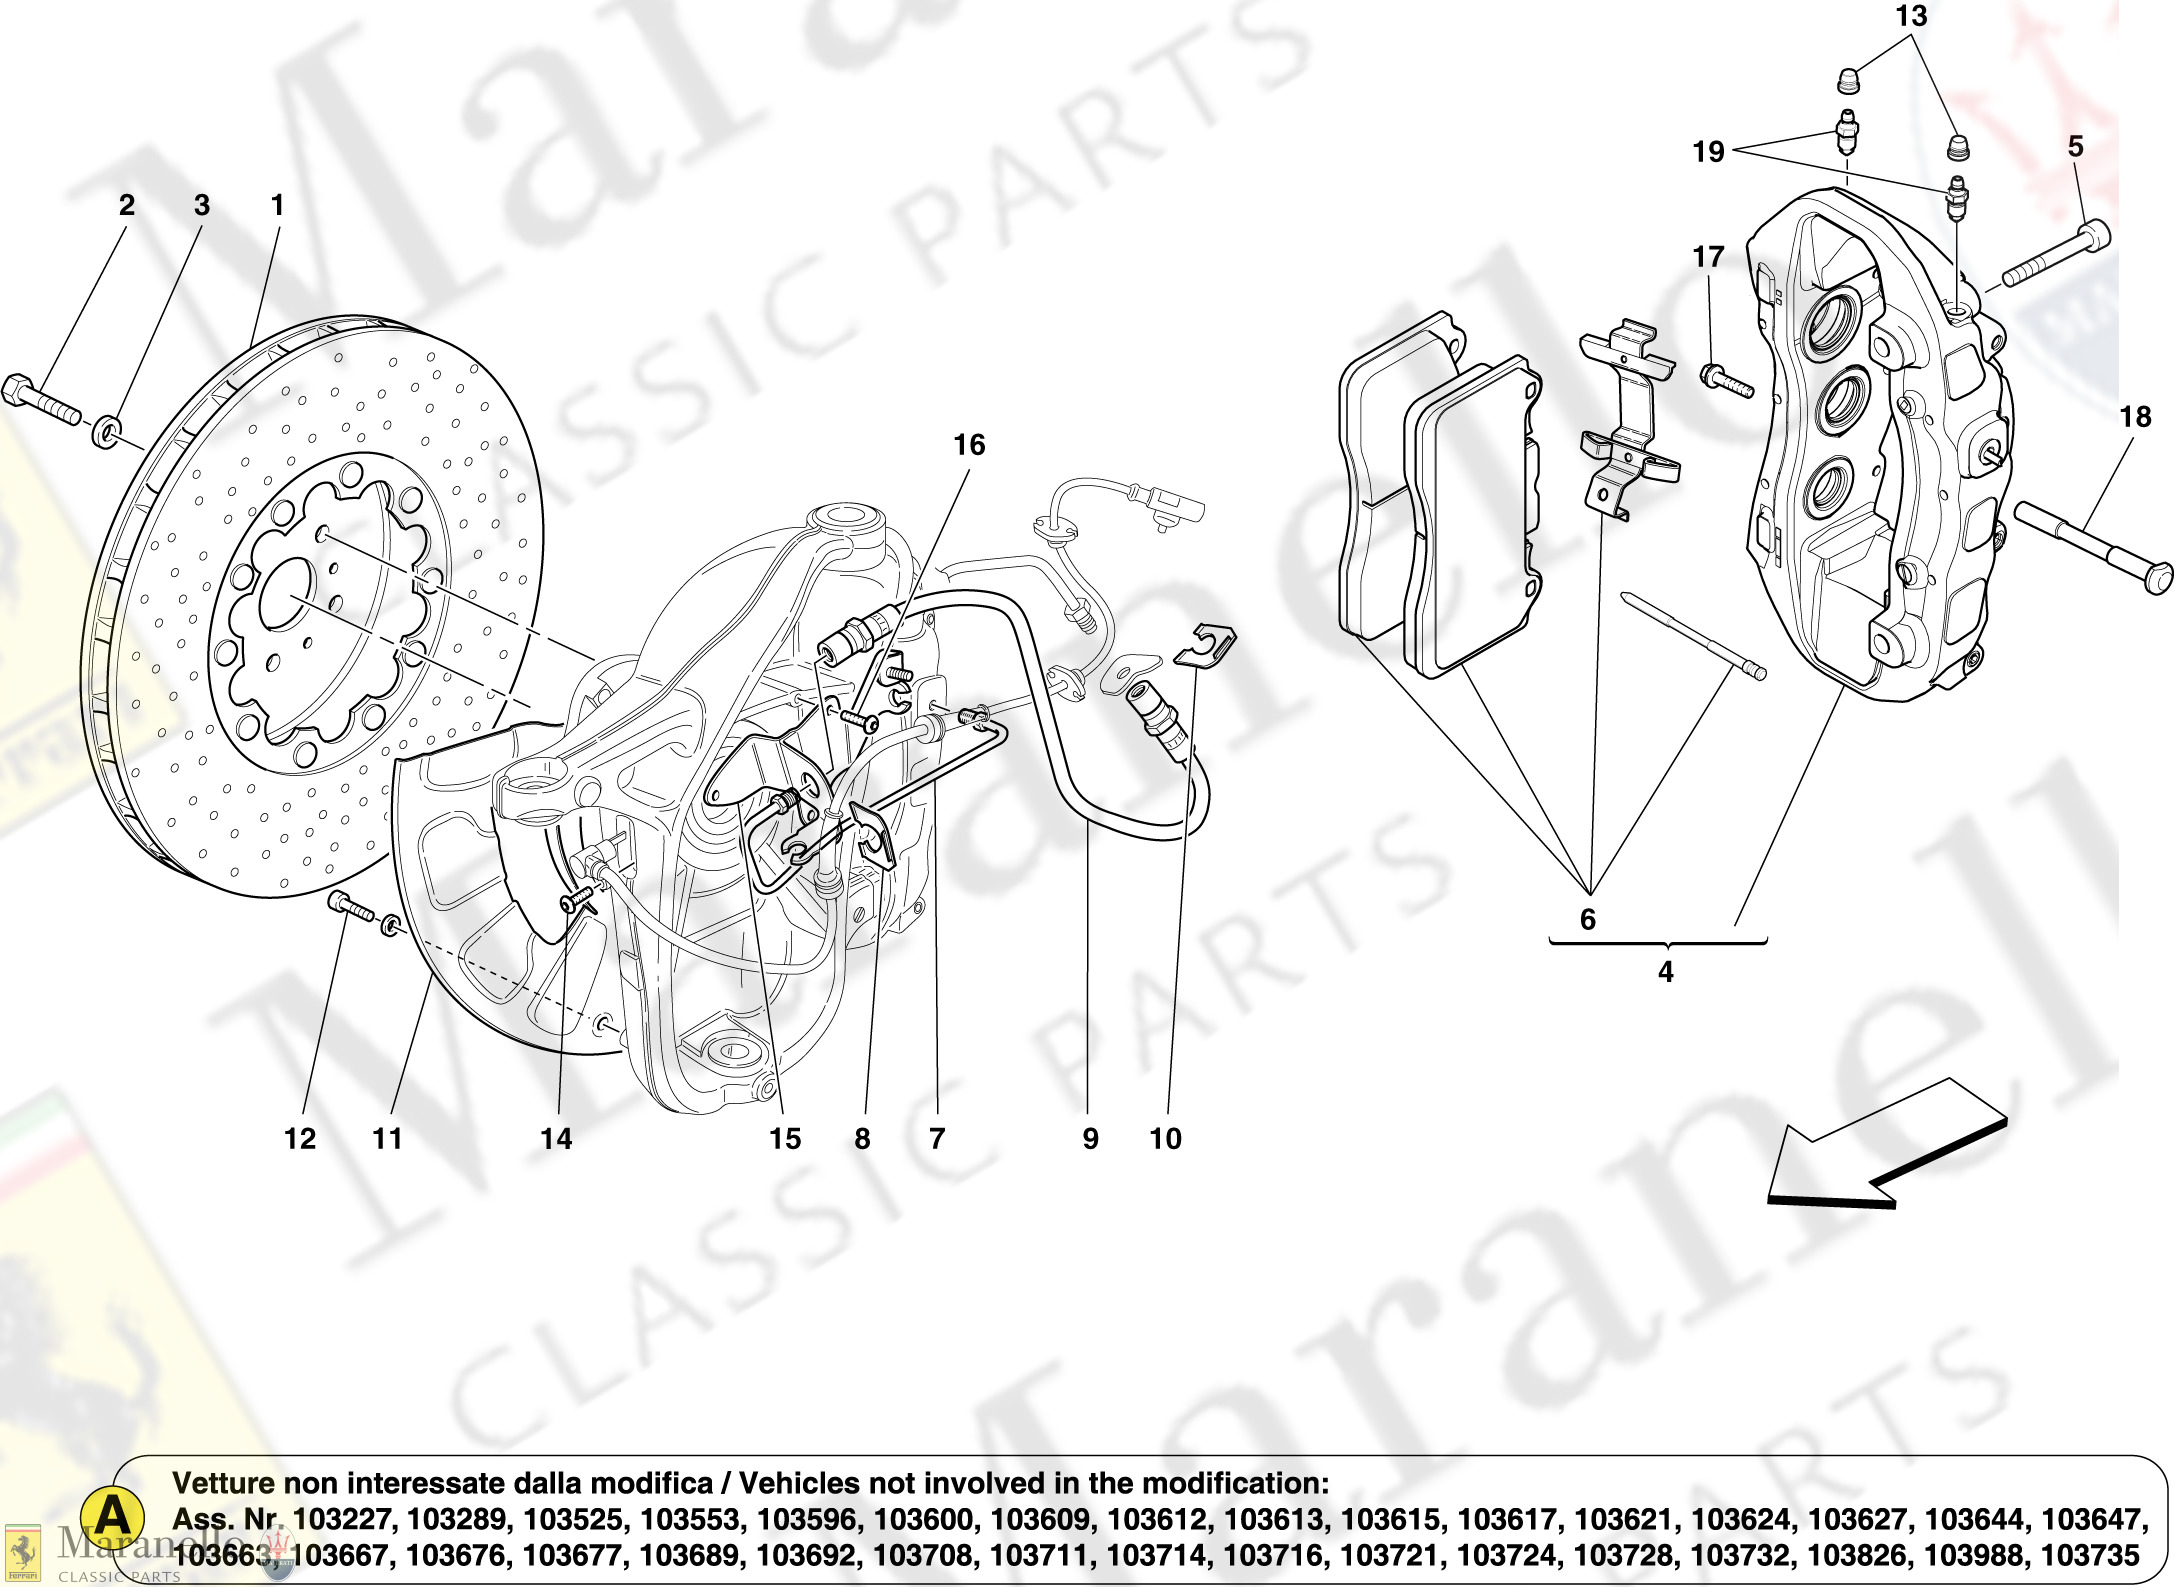 039 - Front Wheel Brake System Components